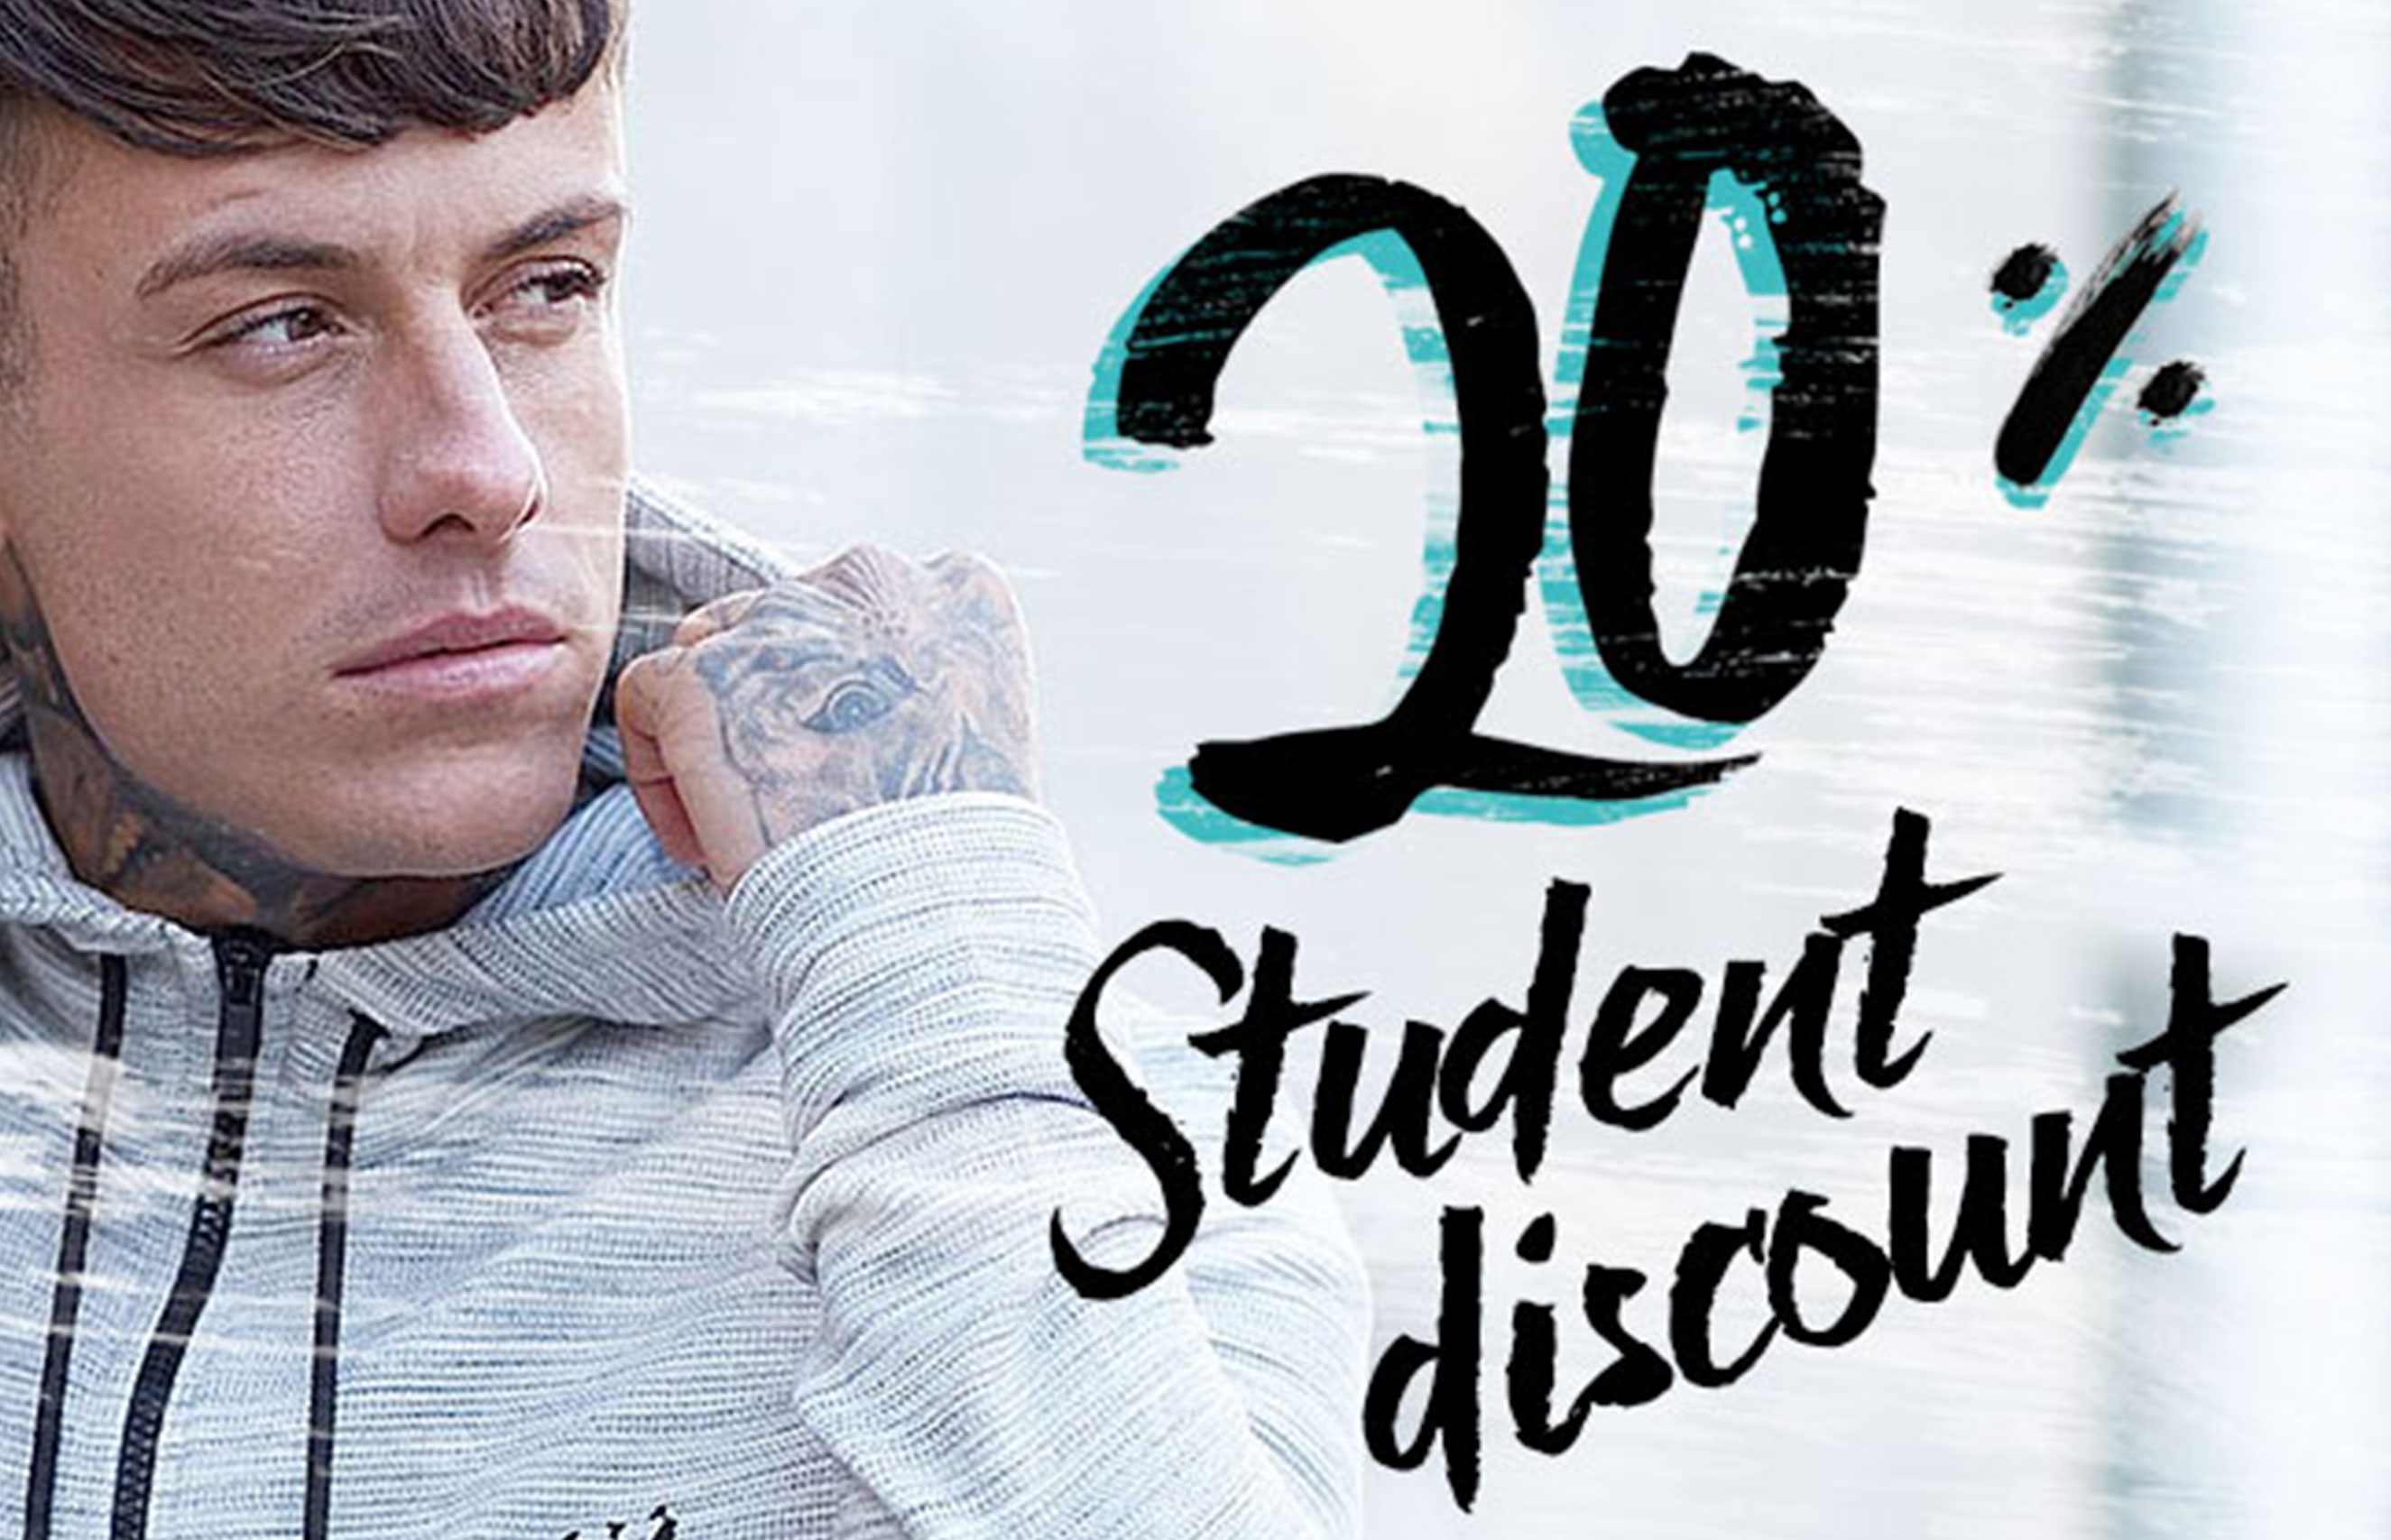 Spend your weekend the right way with 20% student discount